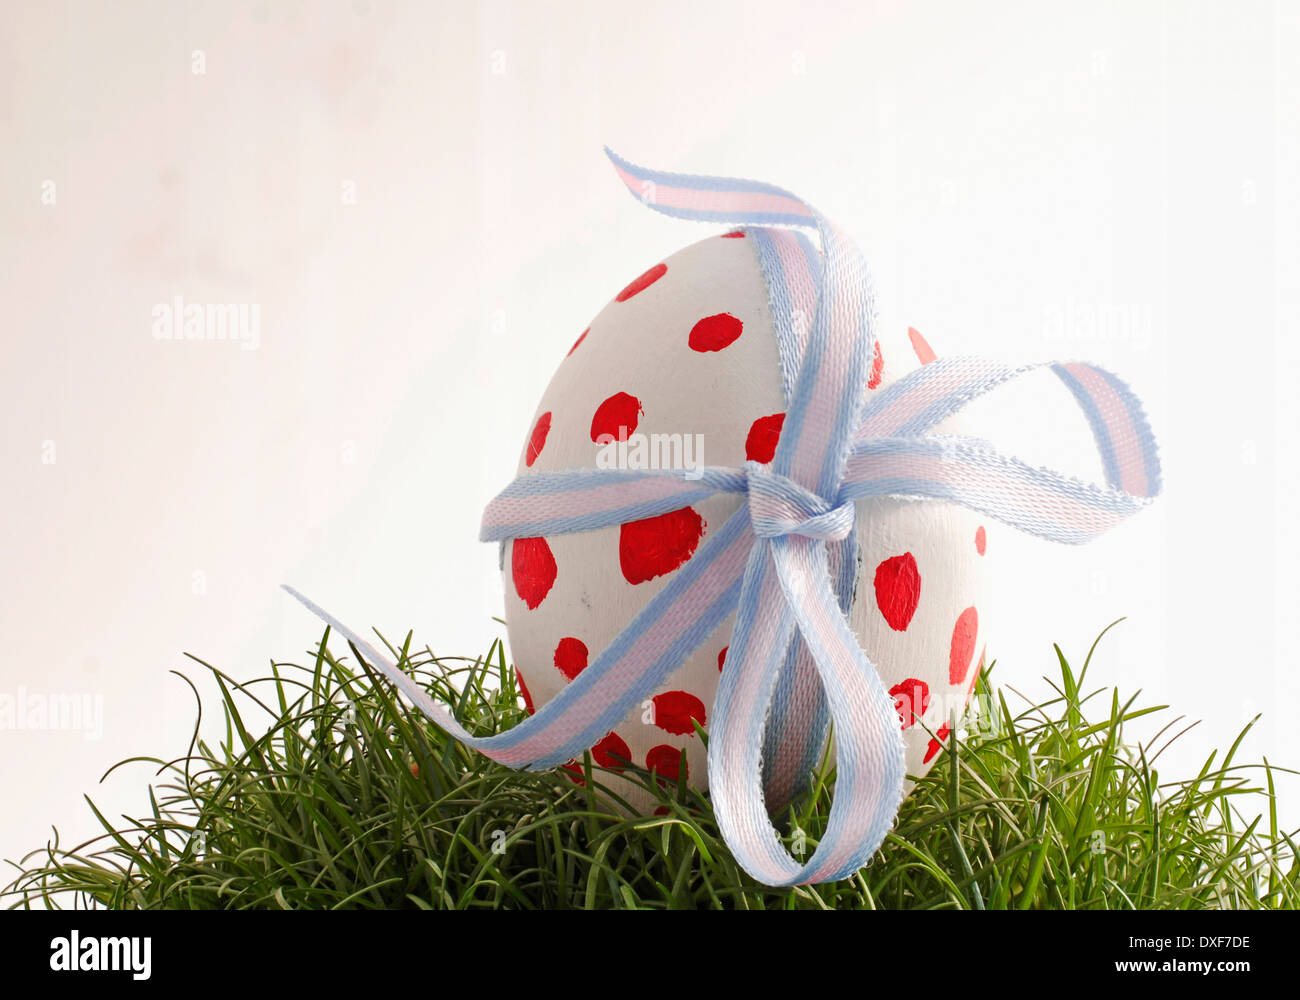 Easter egg with red dots Stock Photo